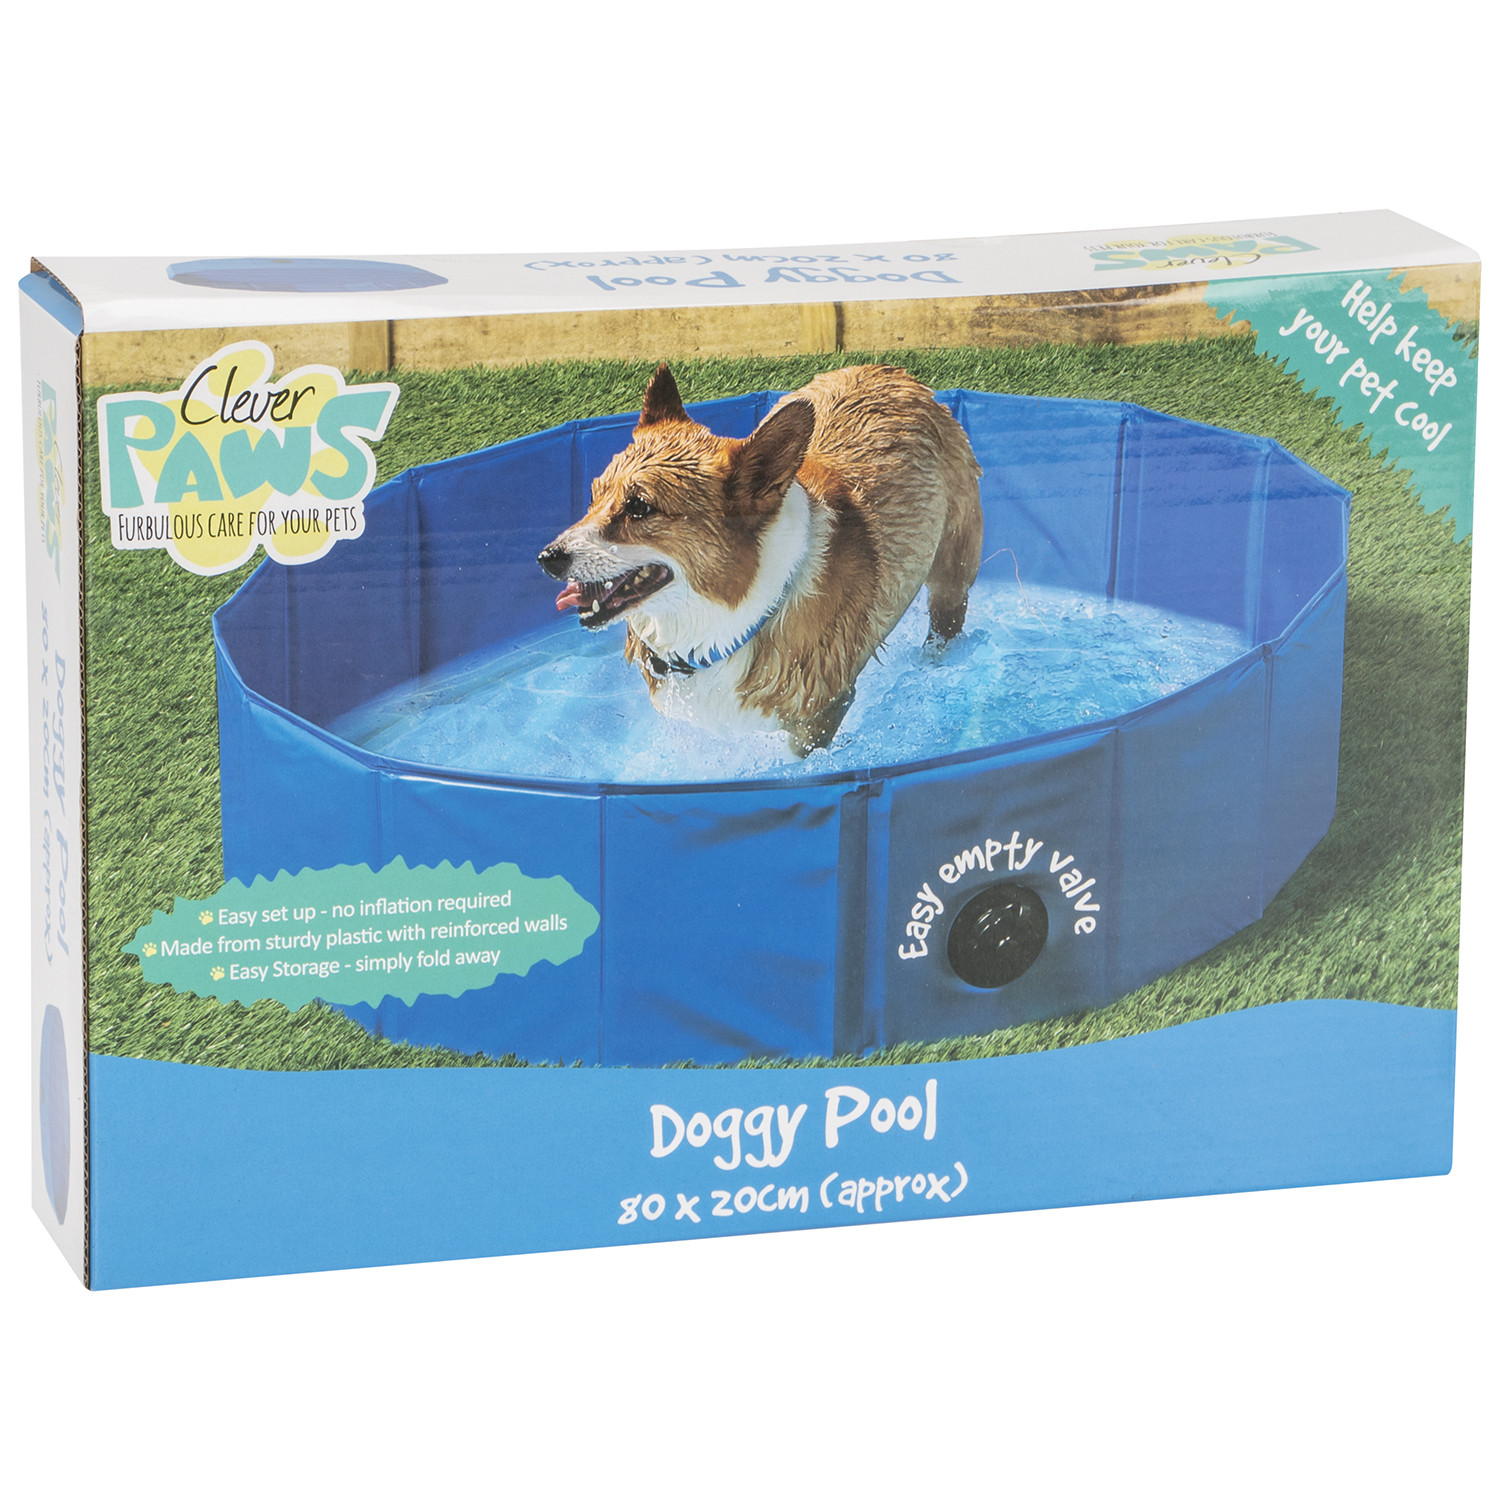 Clever Paws Doggy Paddling Pool 80cm Image 1